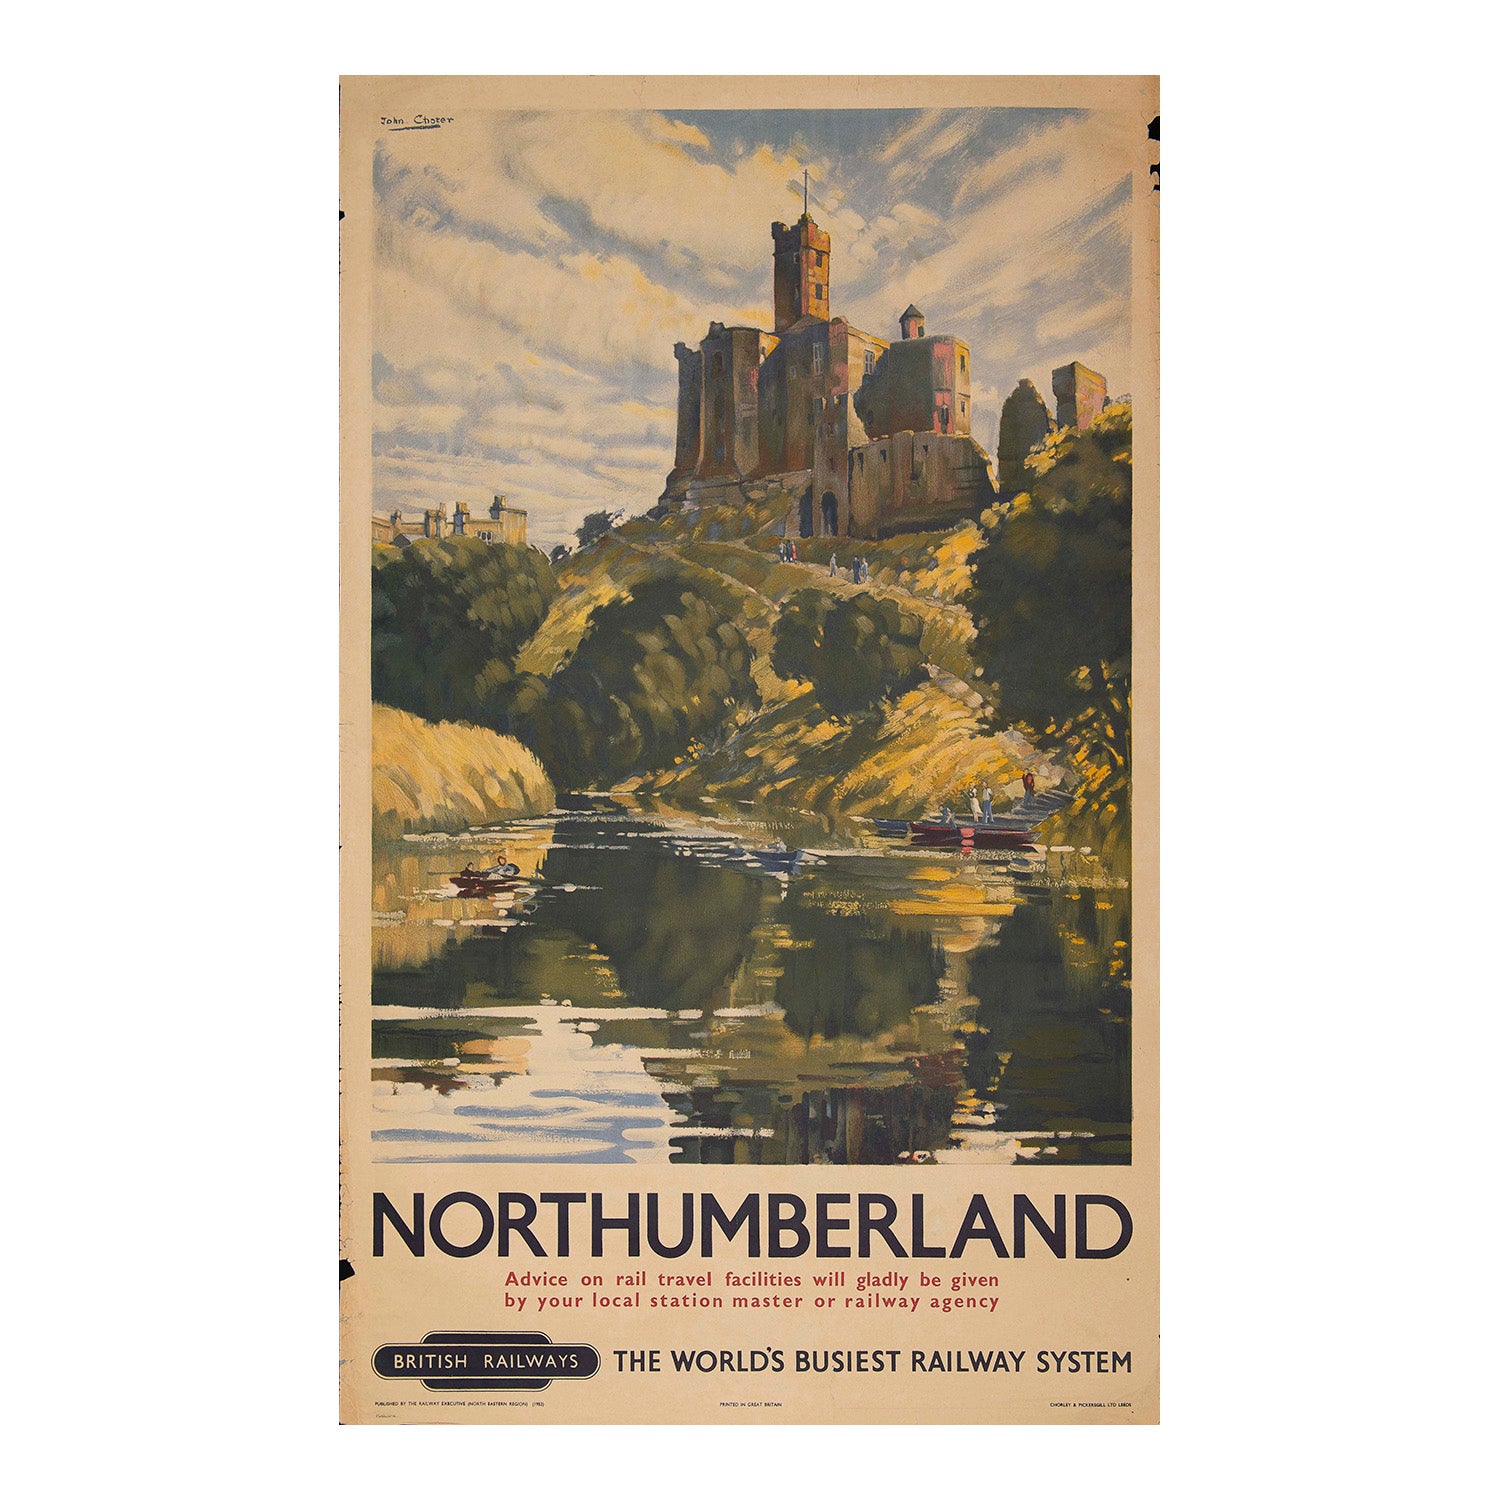 railway poster for Northumberland, painted by John Choter and published by the Railway Executive (North Eastern Region) in 1952. The design features Warkworth Castle as seen from the River Coquet, with vowing boats in the foreground and visitors walking up the steep path to the castle keep